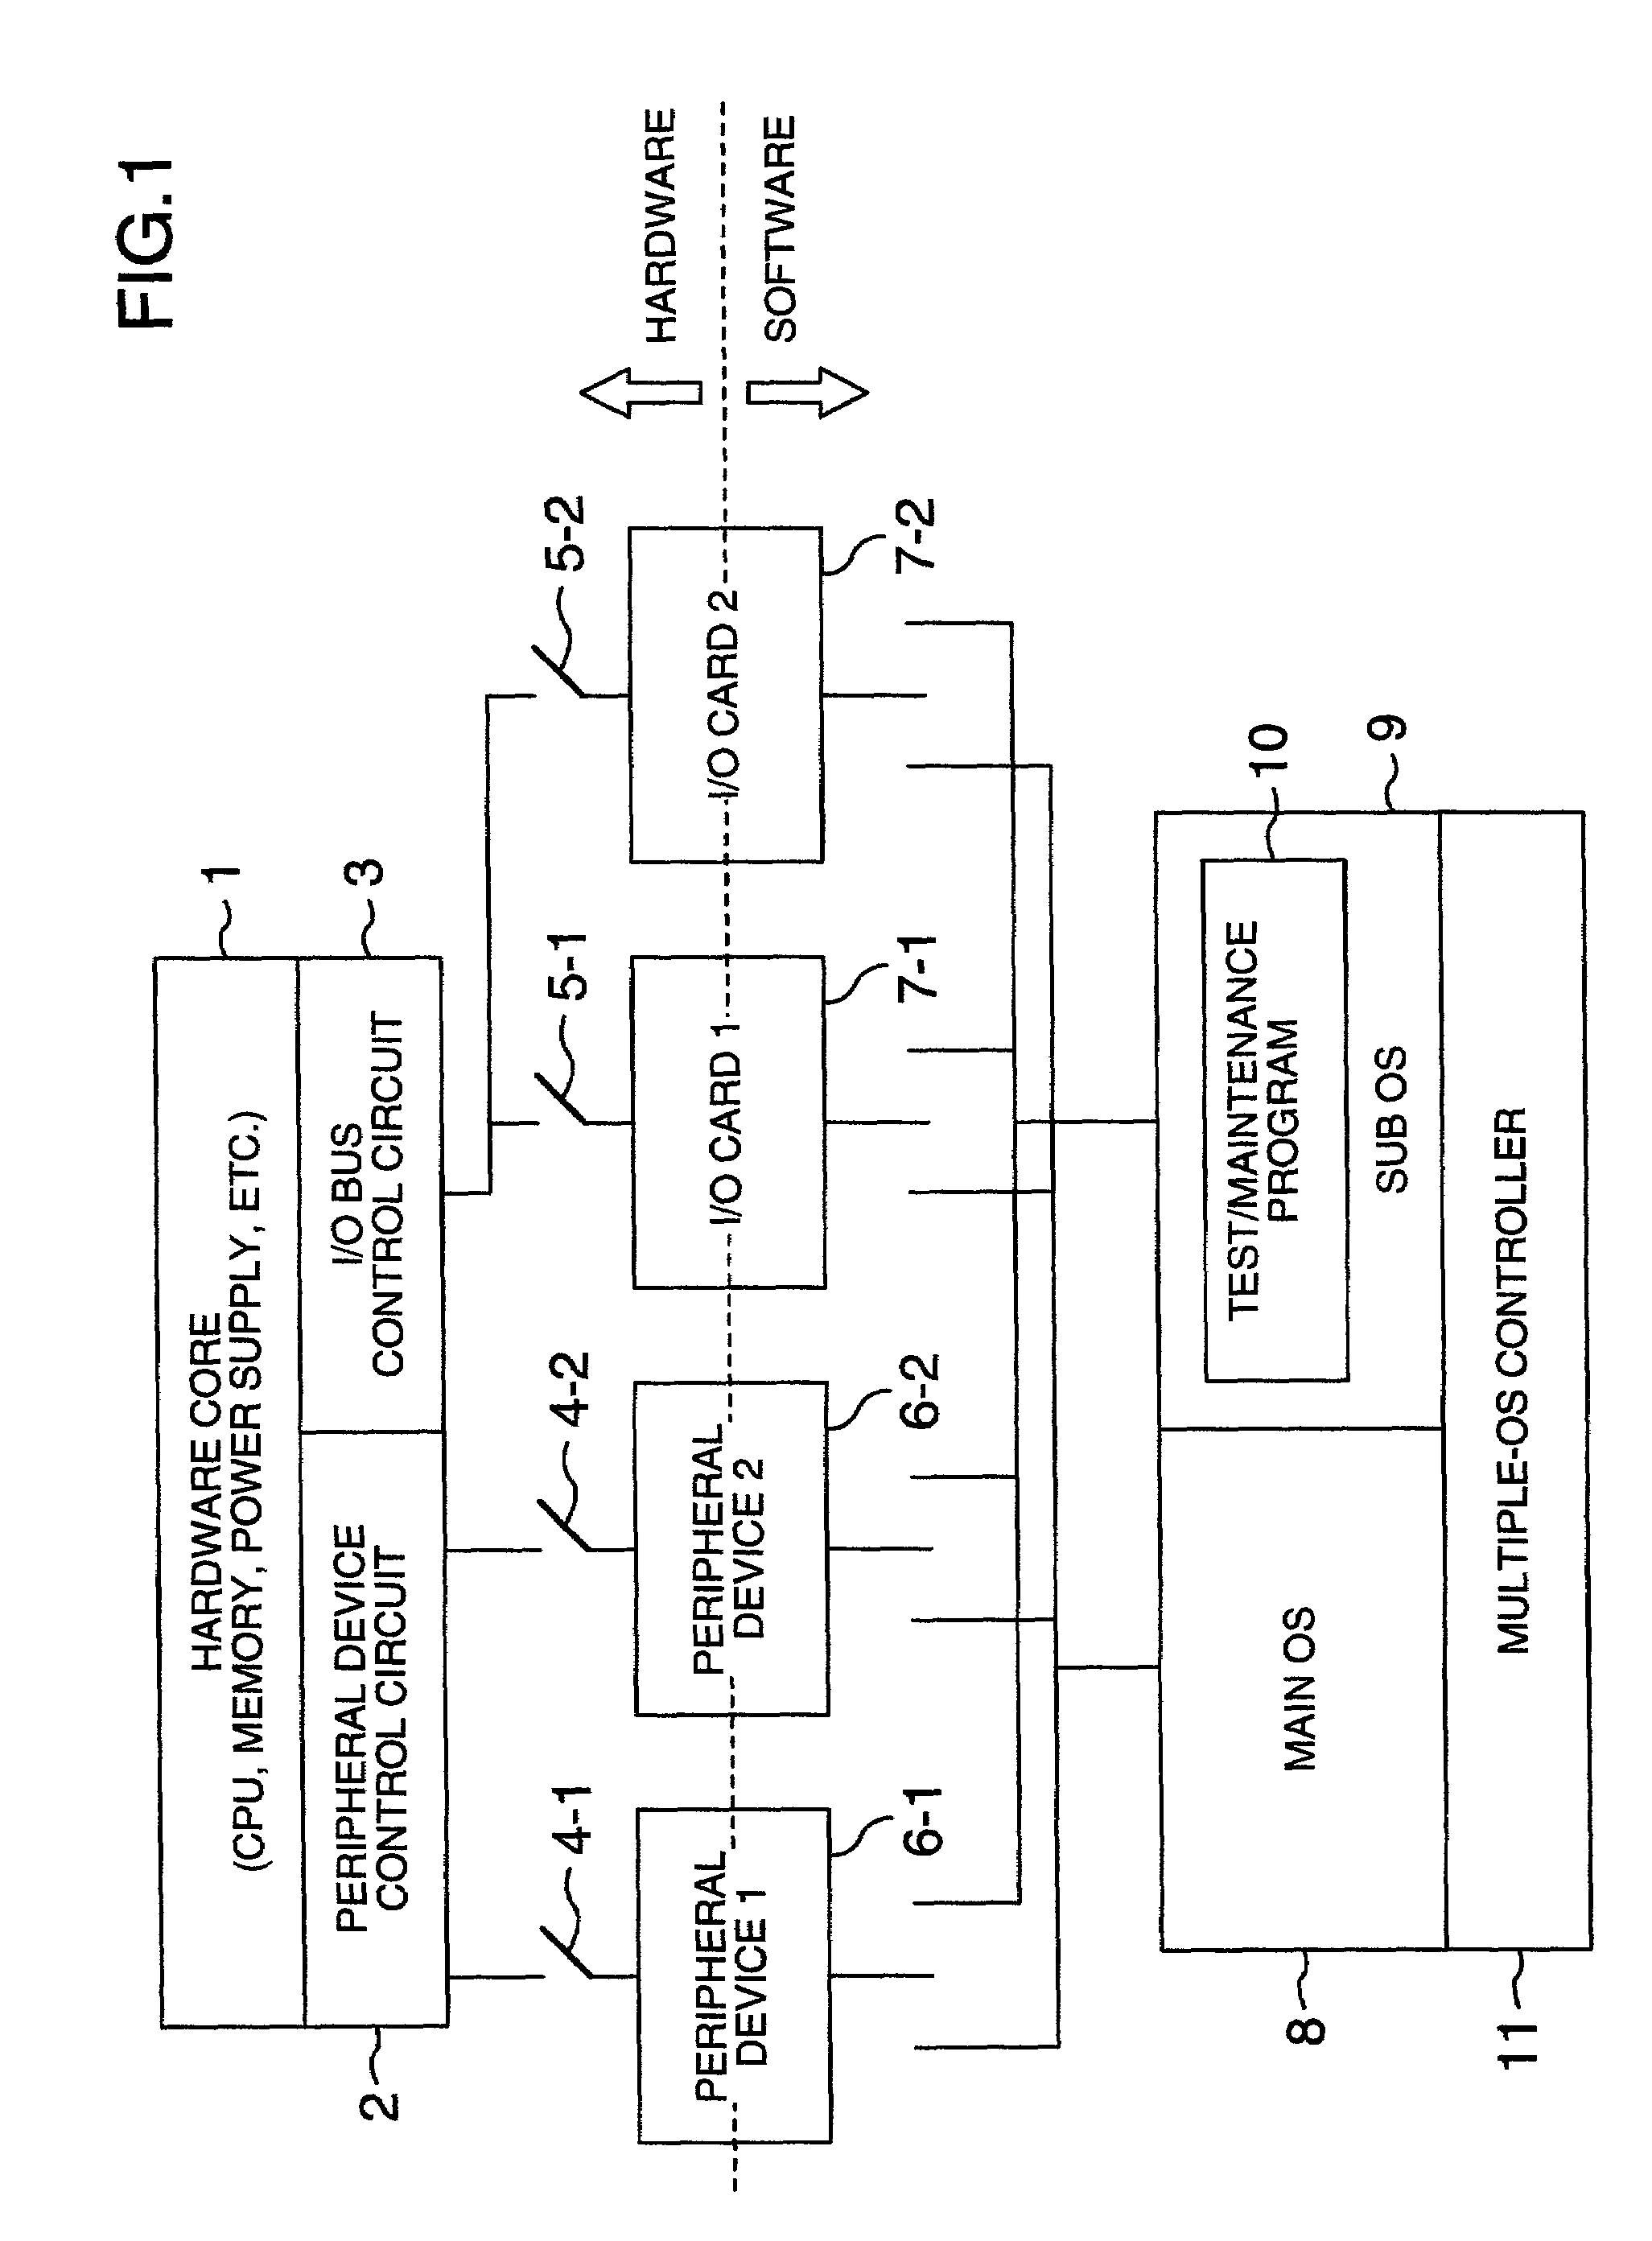 Computer apparatus and method of diagnosing the computer apparatus and replacing, repairing or adding hardware during non-stop operation of the computer apparatus